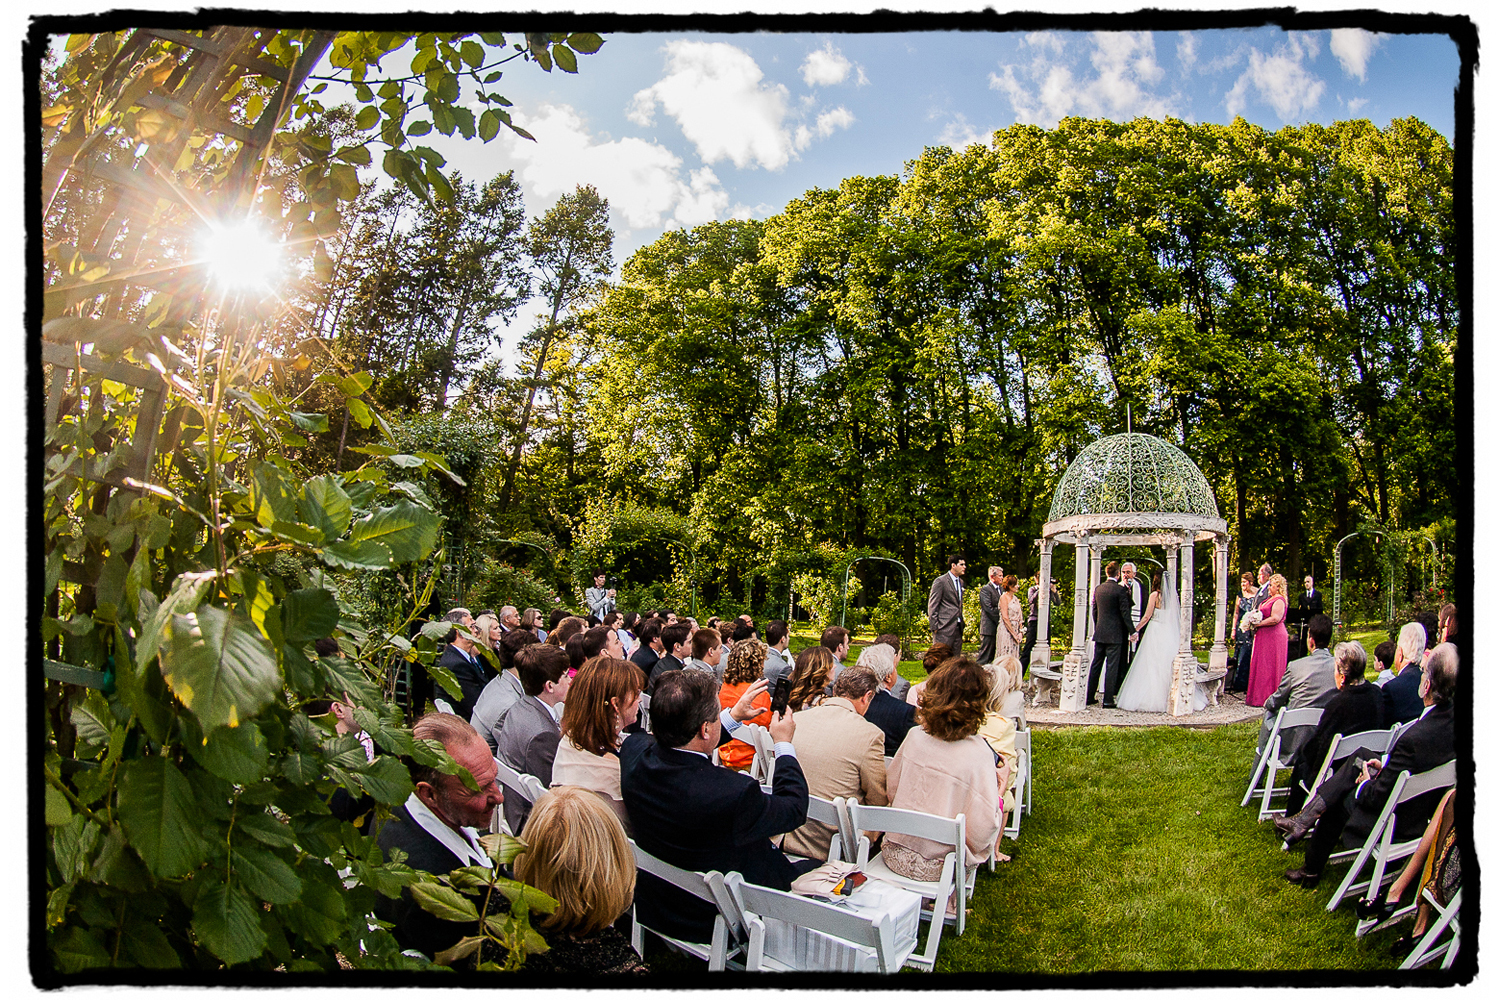 Michelle and Dan's summer ceremony in the rose garden gazebo at Lyndhurst Castle in Westchester NY.